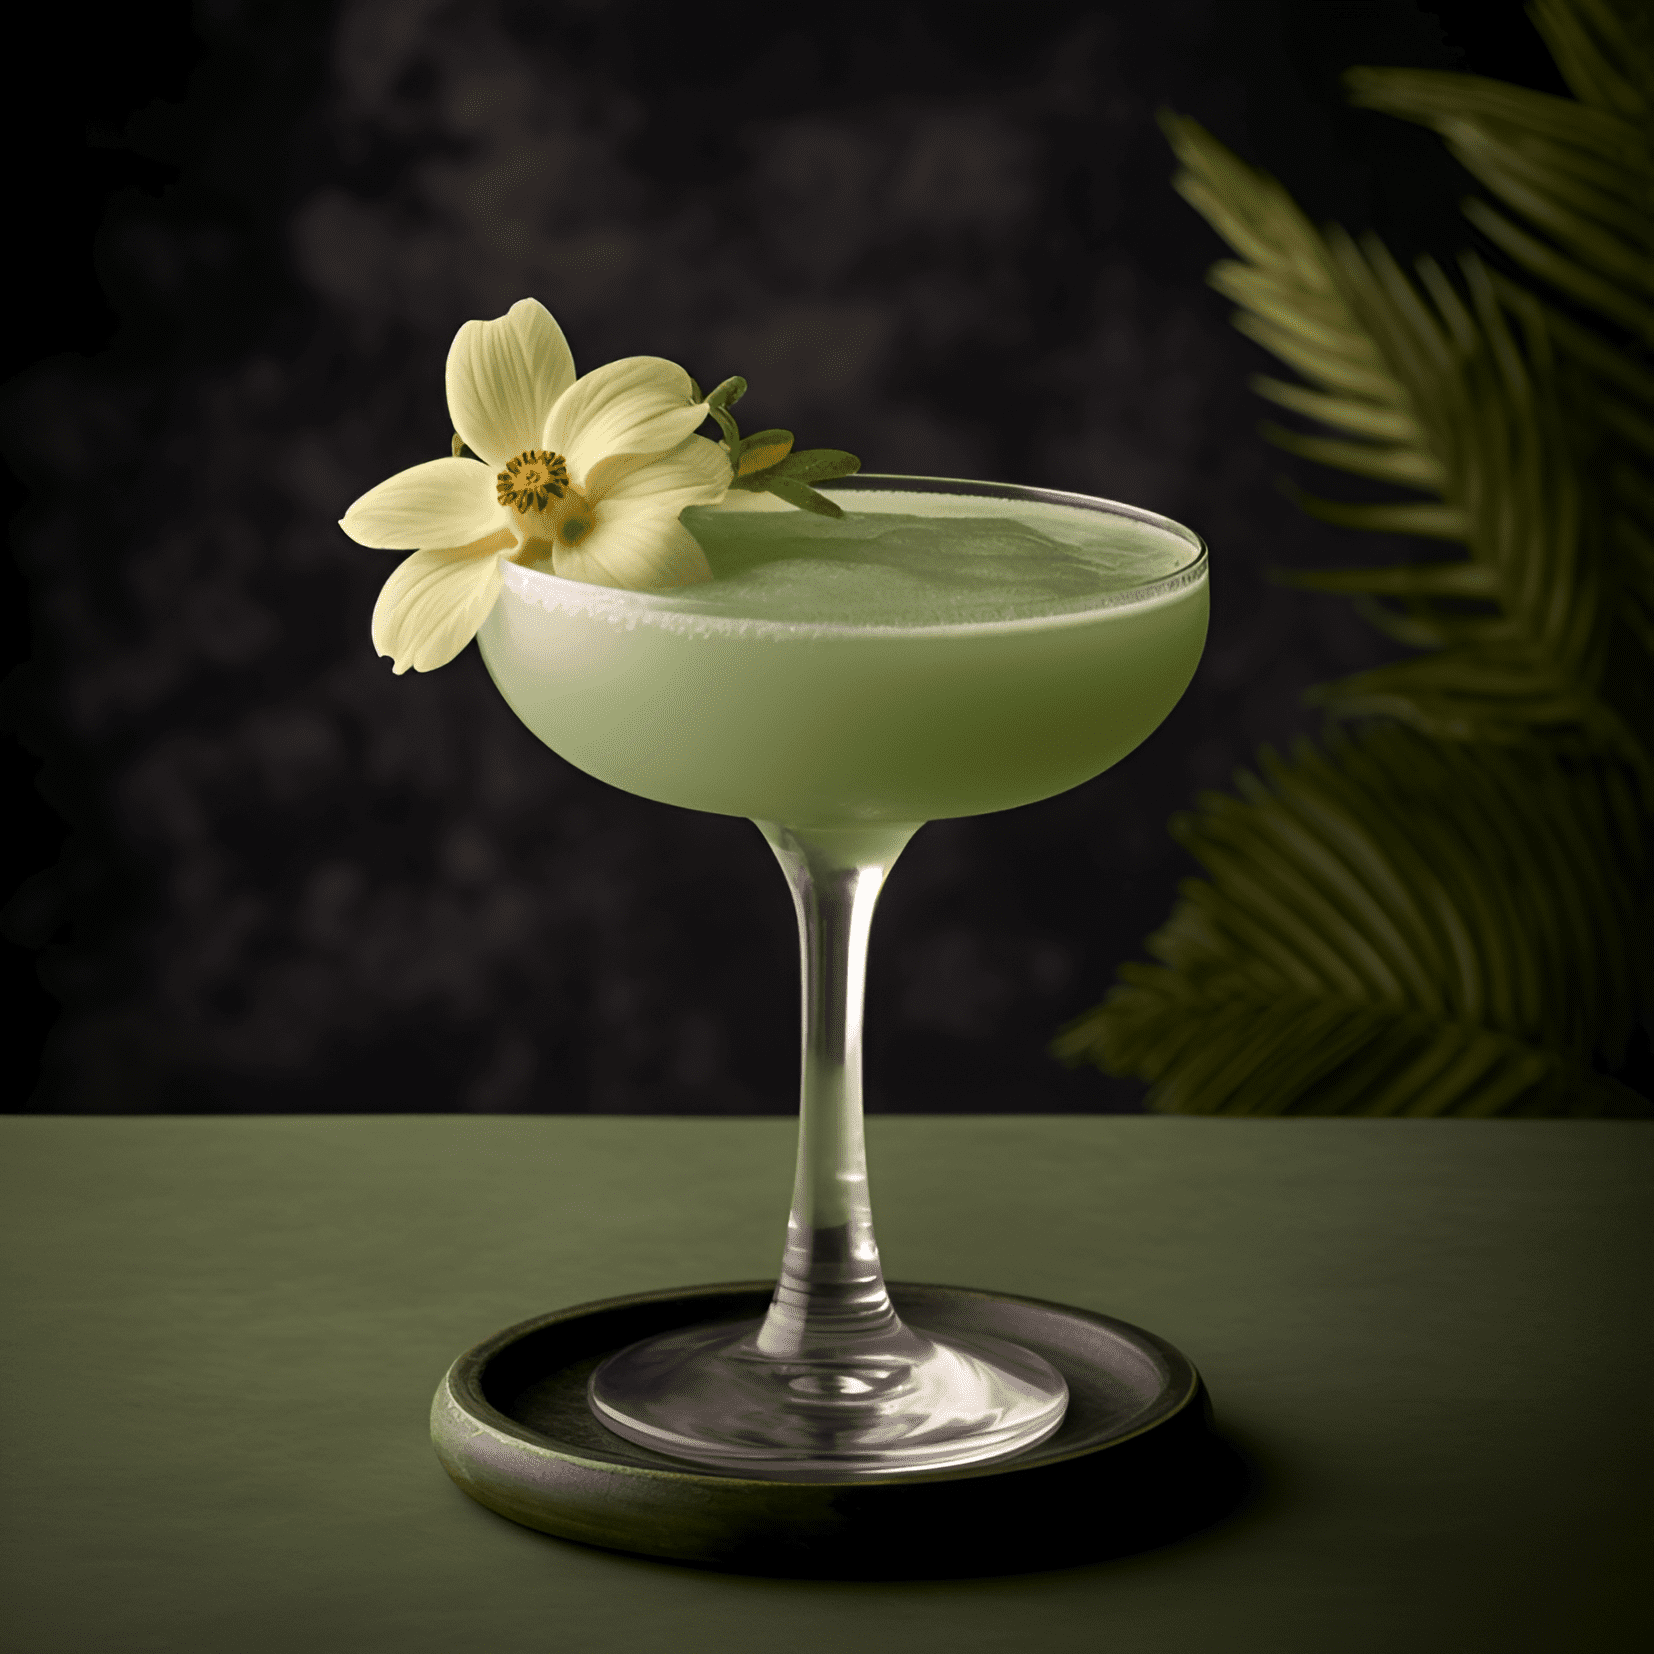 Daiquiri Blossom Cocktail Recipe - The Daiquiri Blossom is a delightful balance of sweet, sour, and floral flavors. The tartness of the lime juice is complemented by the sweetness of the simple syrup, while the elderflower liqueur adds a delicate, fragrant touch. The rum provides a smooth, warming base that ties everything together.